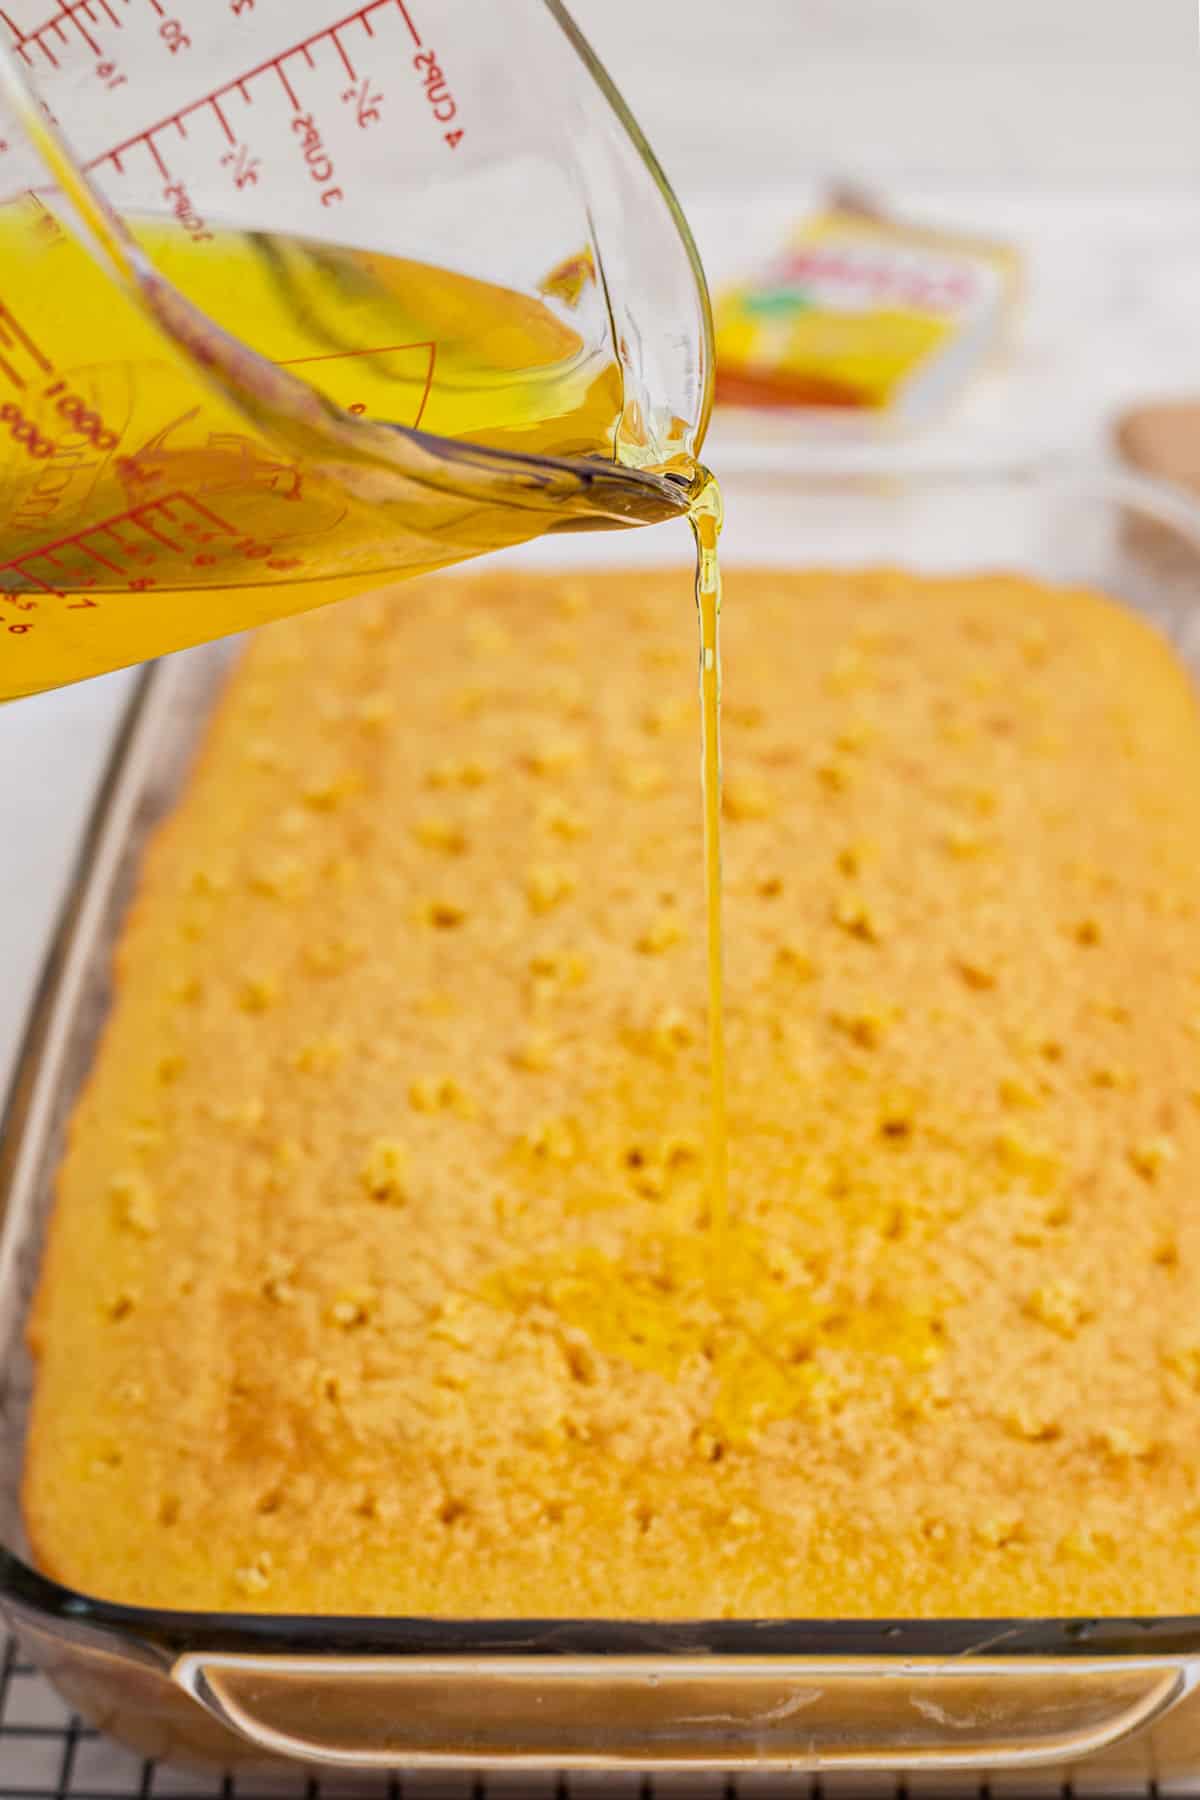 Lemon gelatin being poured over a baked cake.